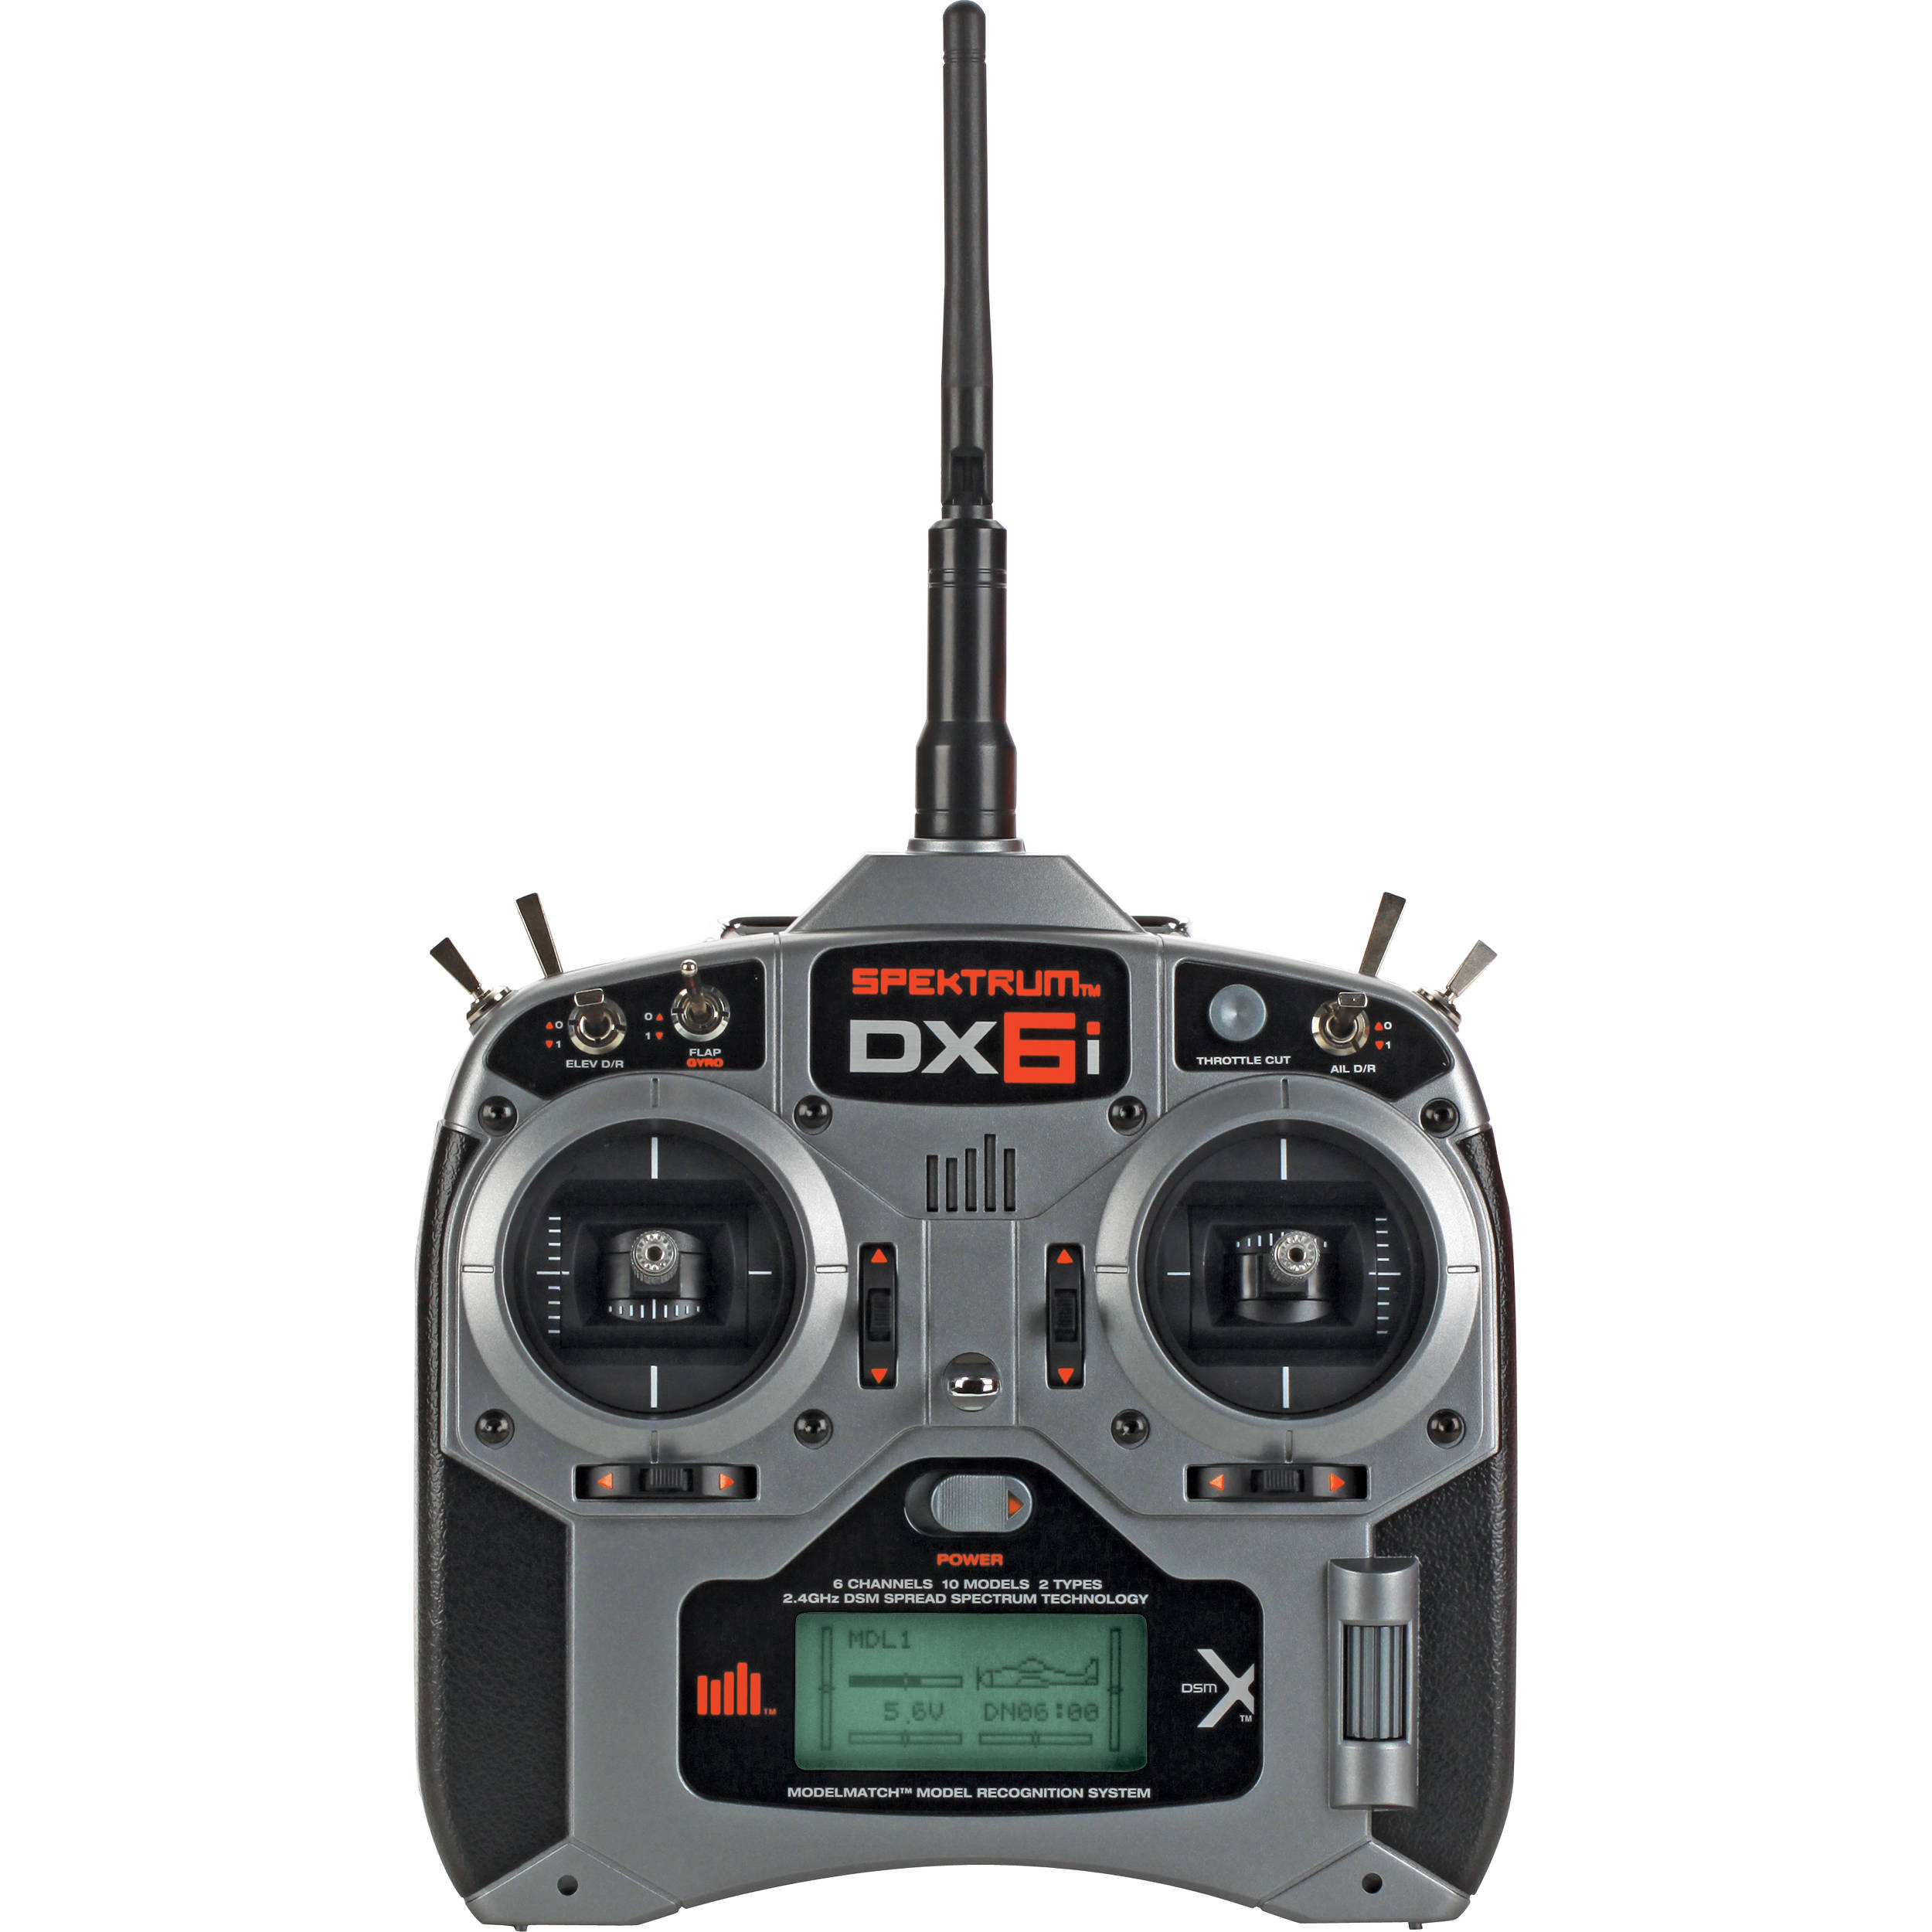 rc plane transmitter and receiver